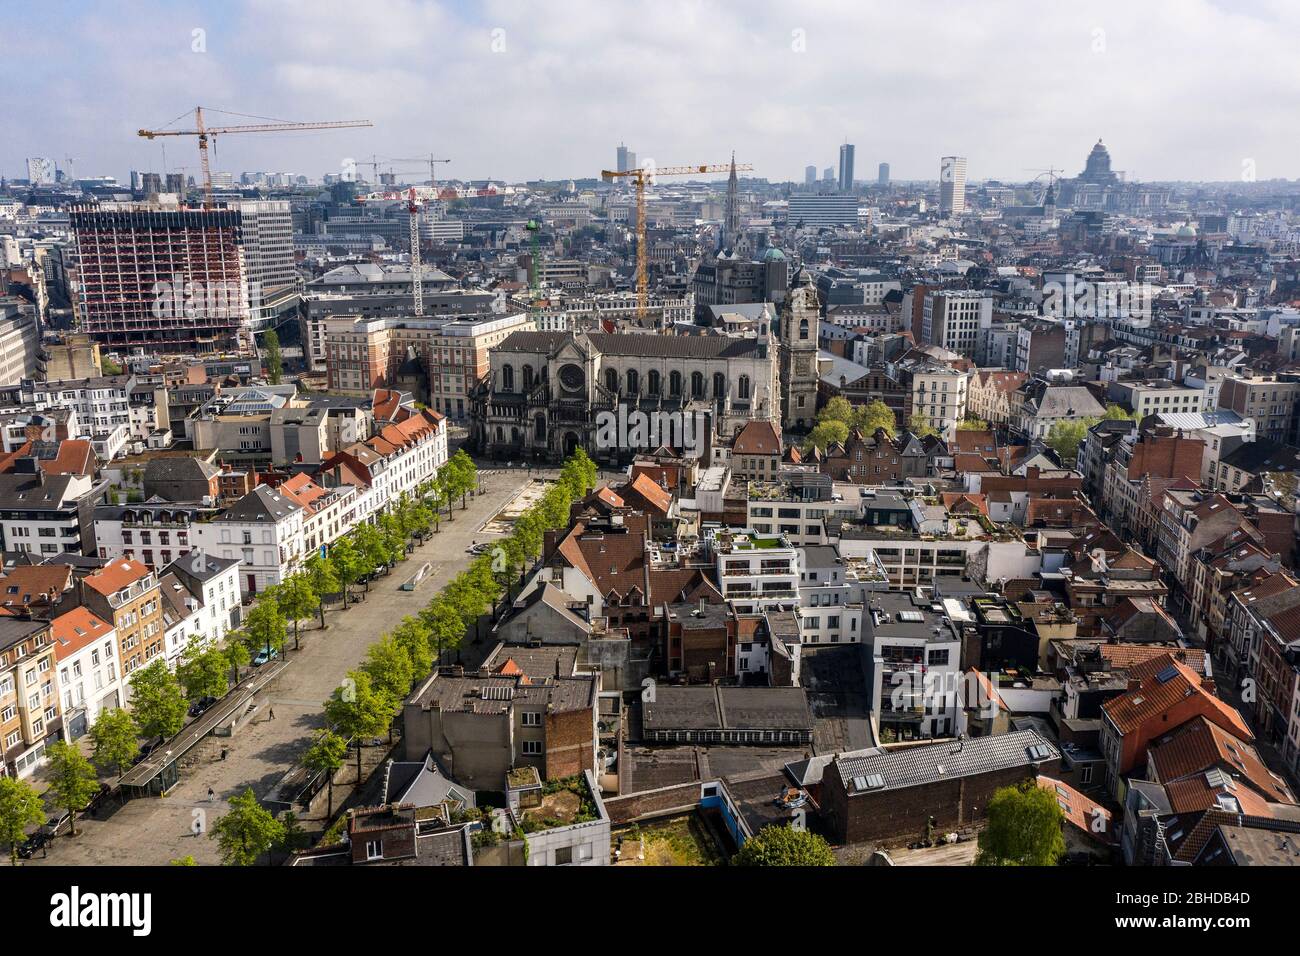 Brussels, Belgium - April 18, 2020 -Aerial view on Quai aux Briques and Sainte-Catherine Church, old and popular quater in Brussels, View During confi Stock Photo